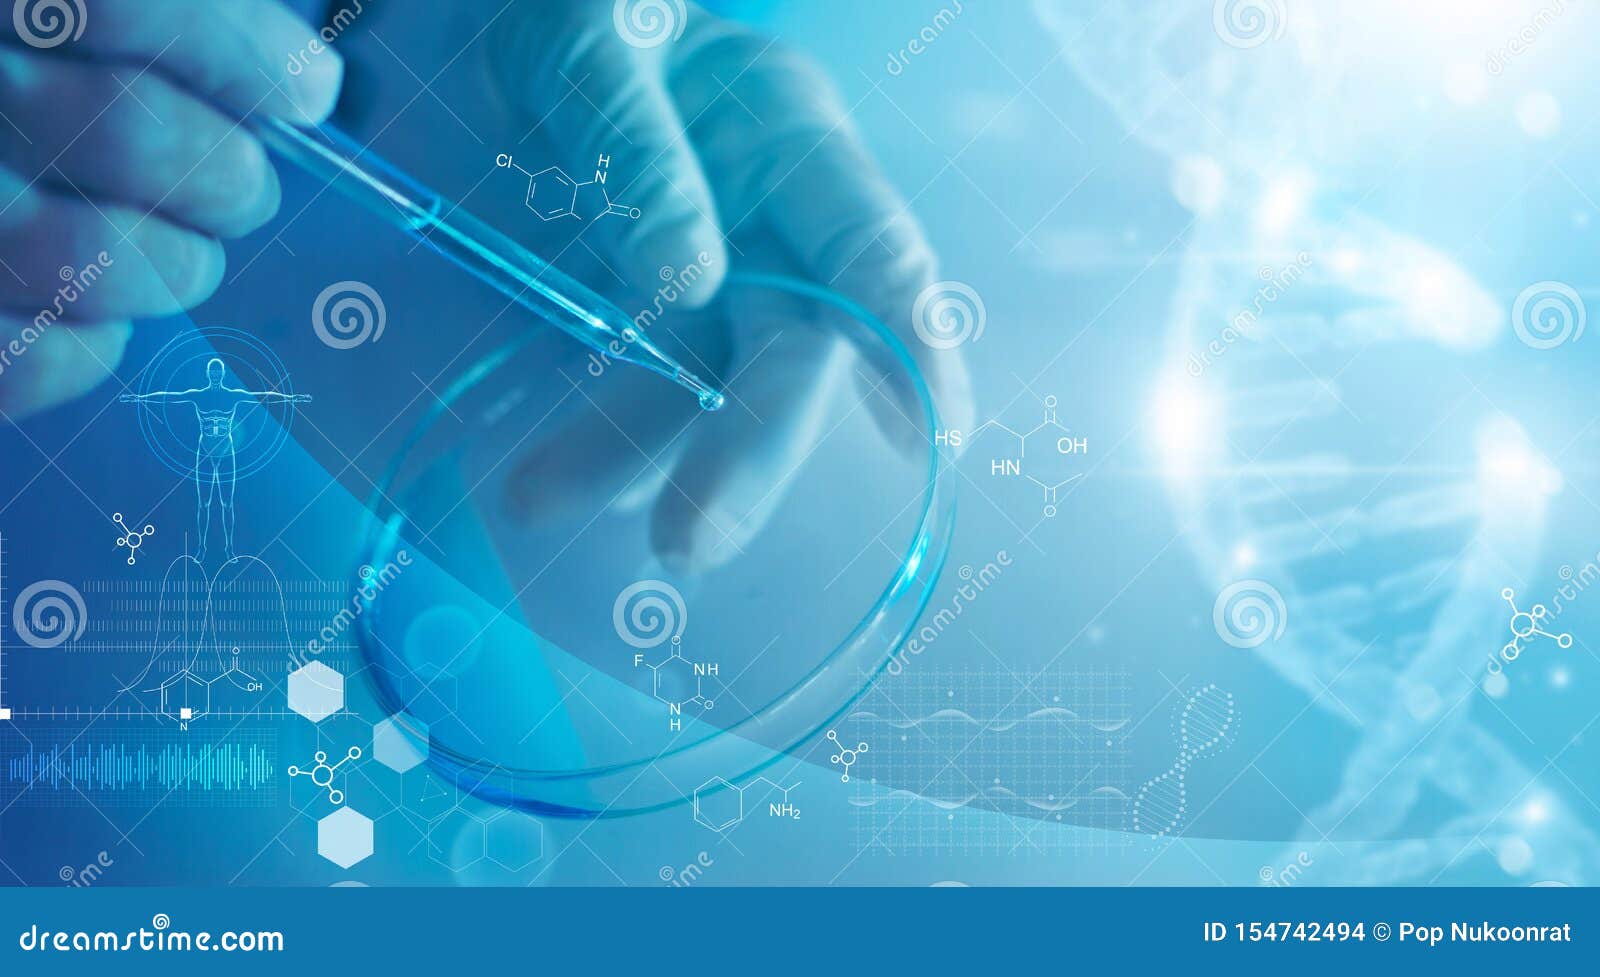 science and medicine, scientist analyzing and dropping a sample into a glassware, experiments containing chemical liquid